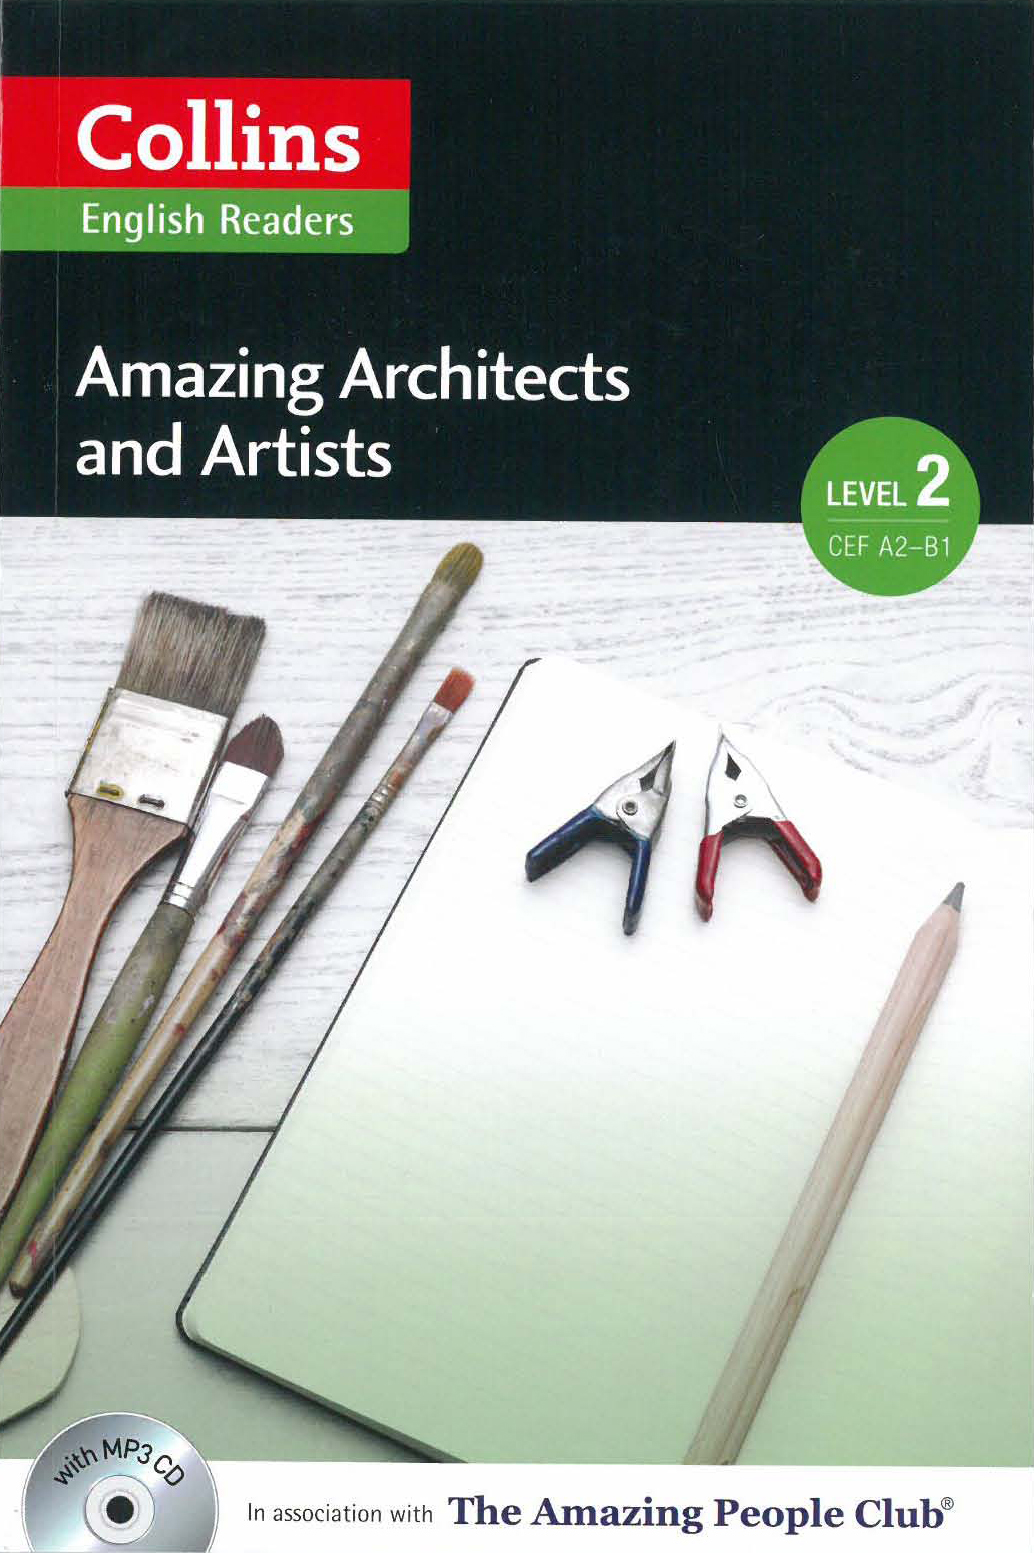 Amazing Architects and Artists